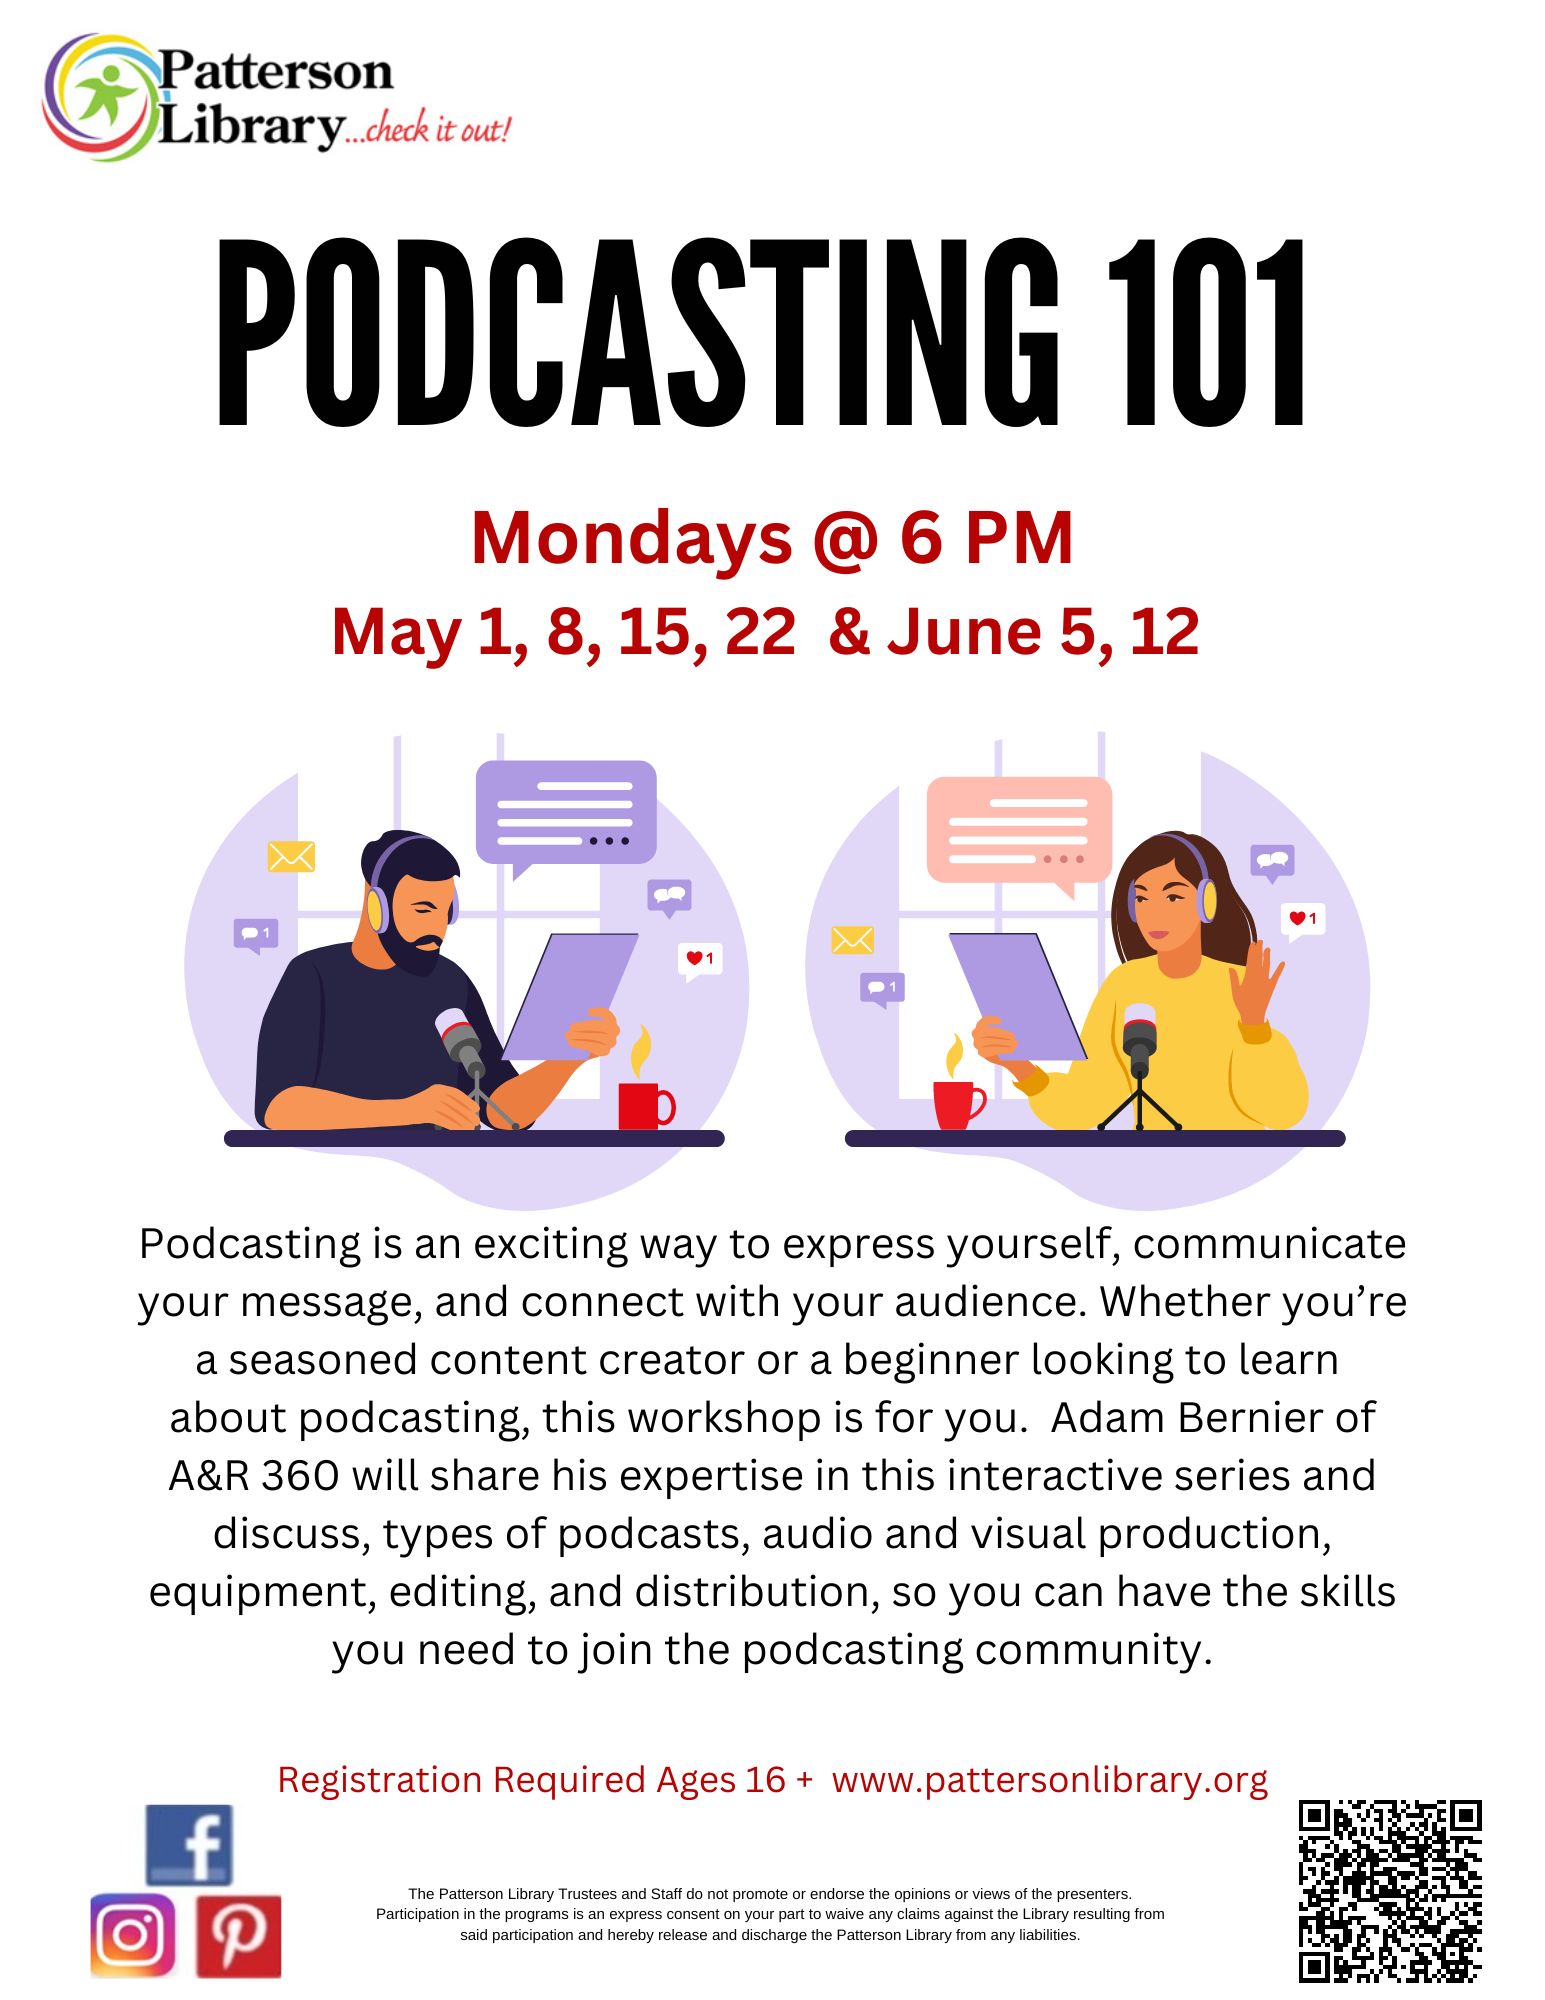 Adam Bernier of A&R 360 will share his expertise in this interactive series and discuss, types of podcasts, audio and video production, equipment, editing, and distribution, so you can have the skills you need to join the podcasting community. 